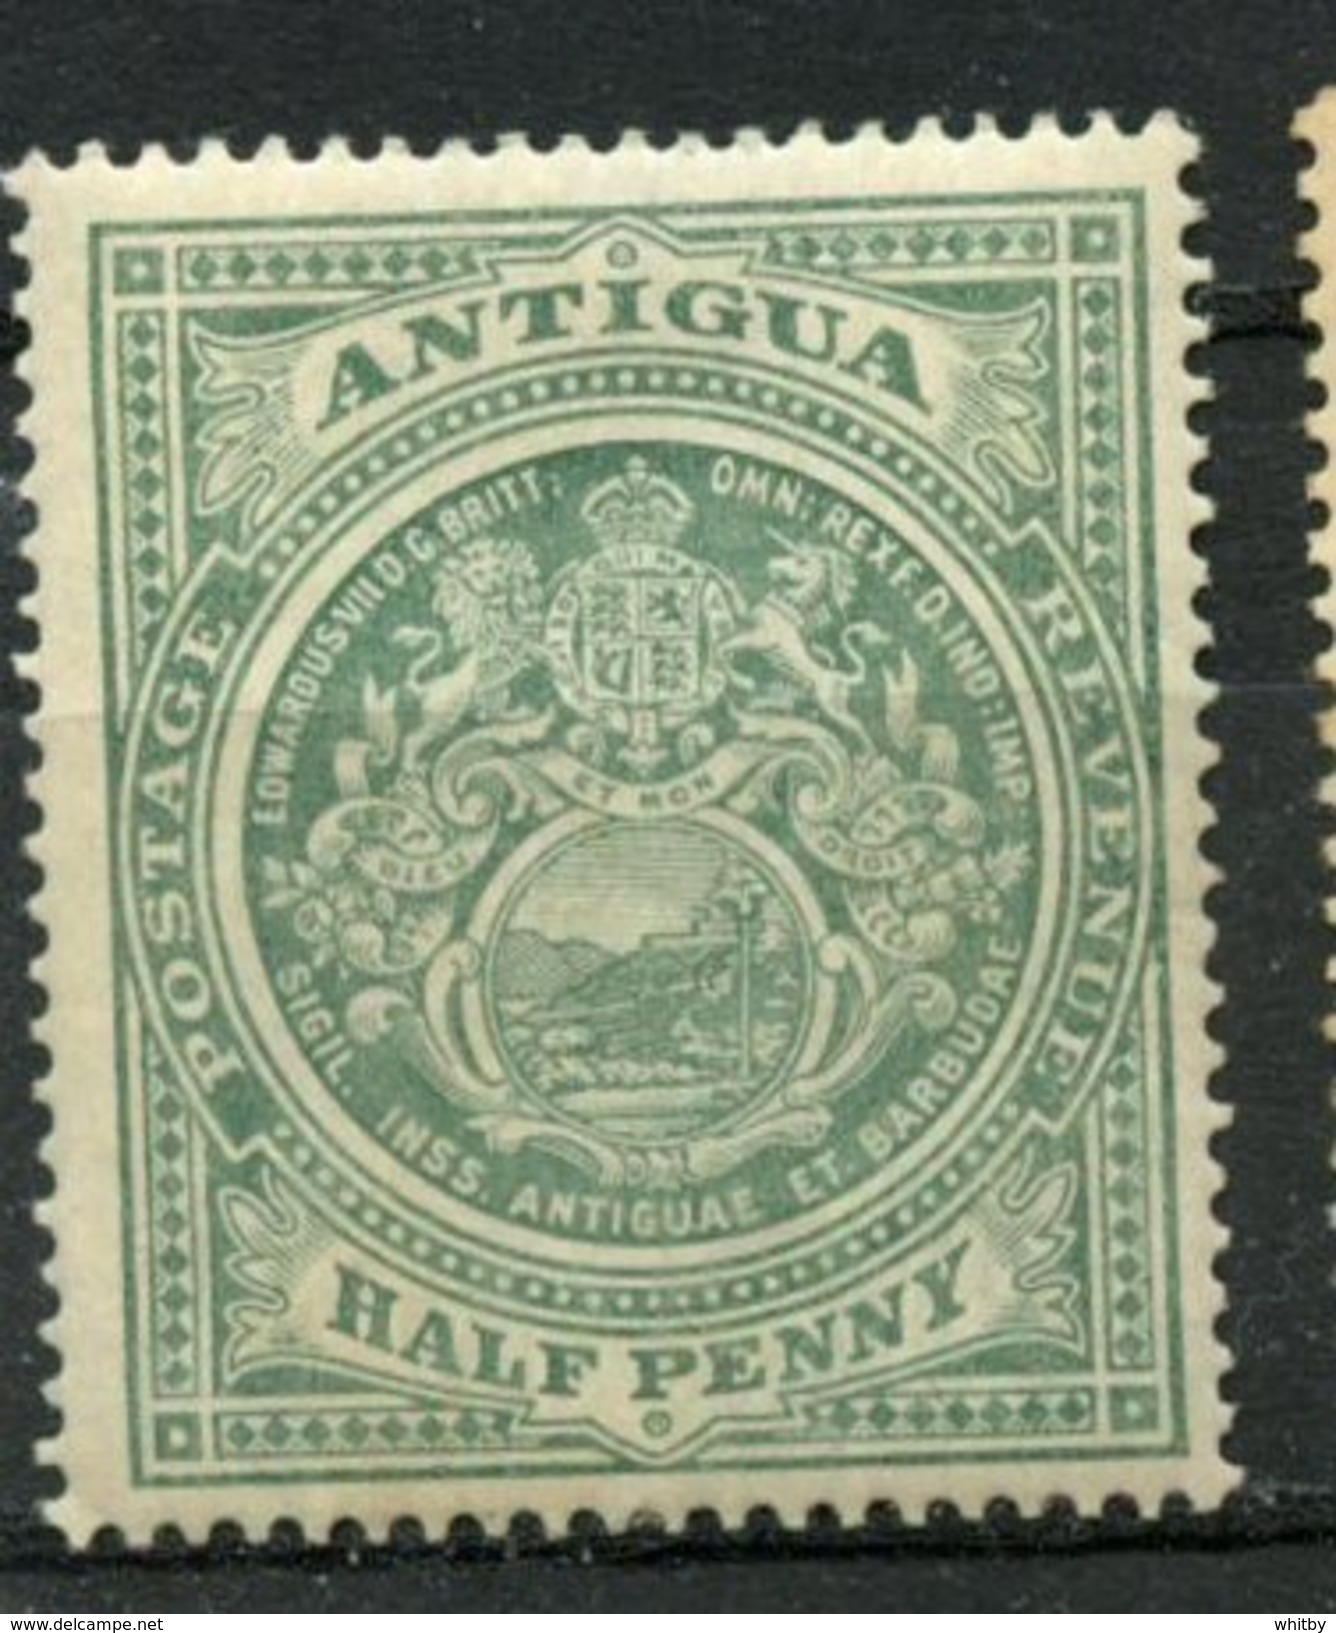 Antigua 1908 1/2p Seal Issue  #31 - 1858-1960 Crown Colony